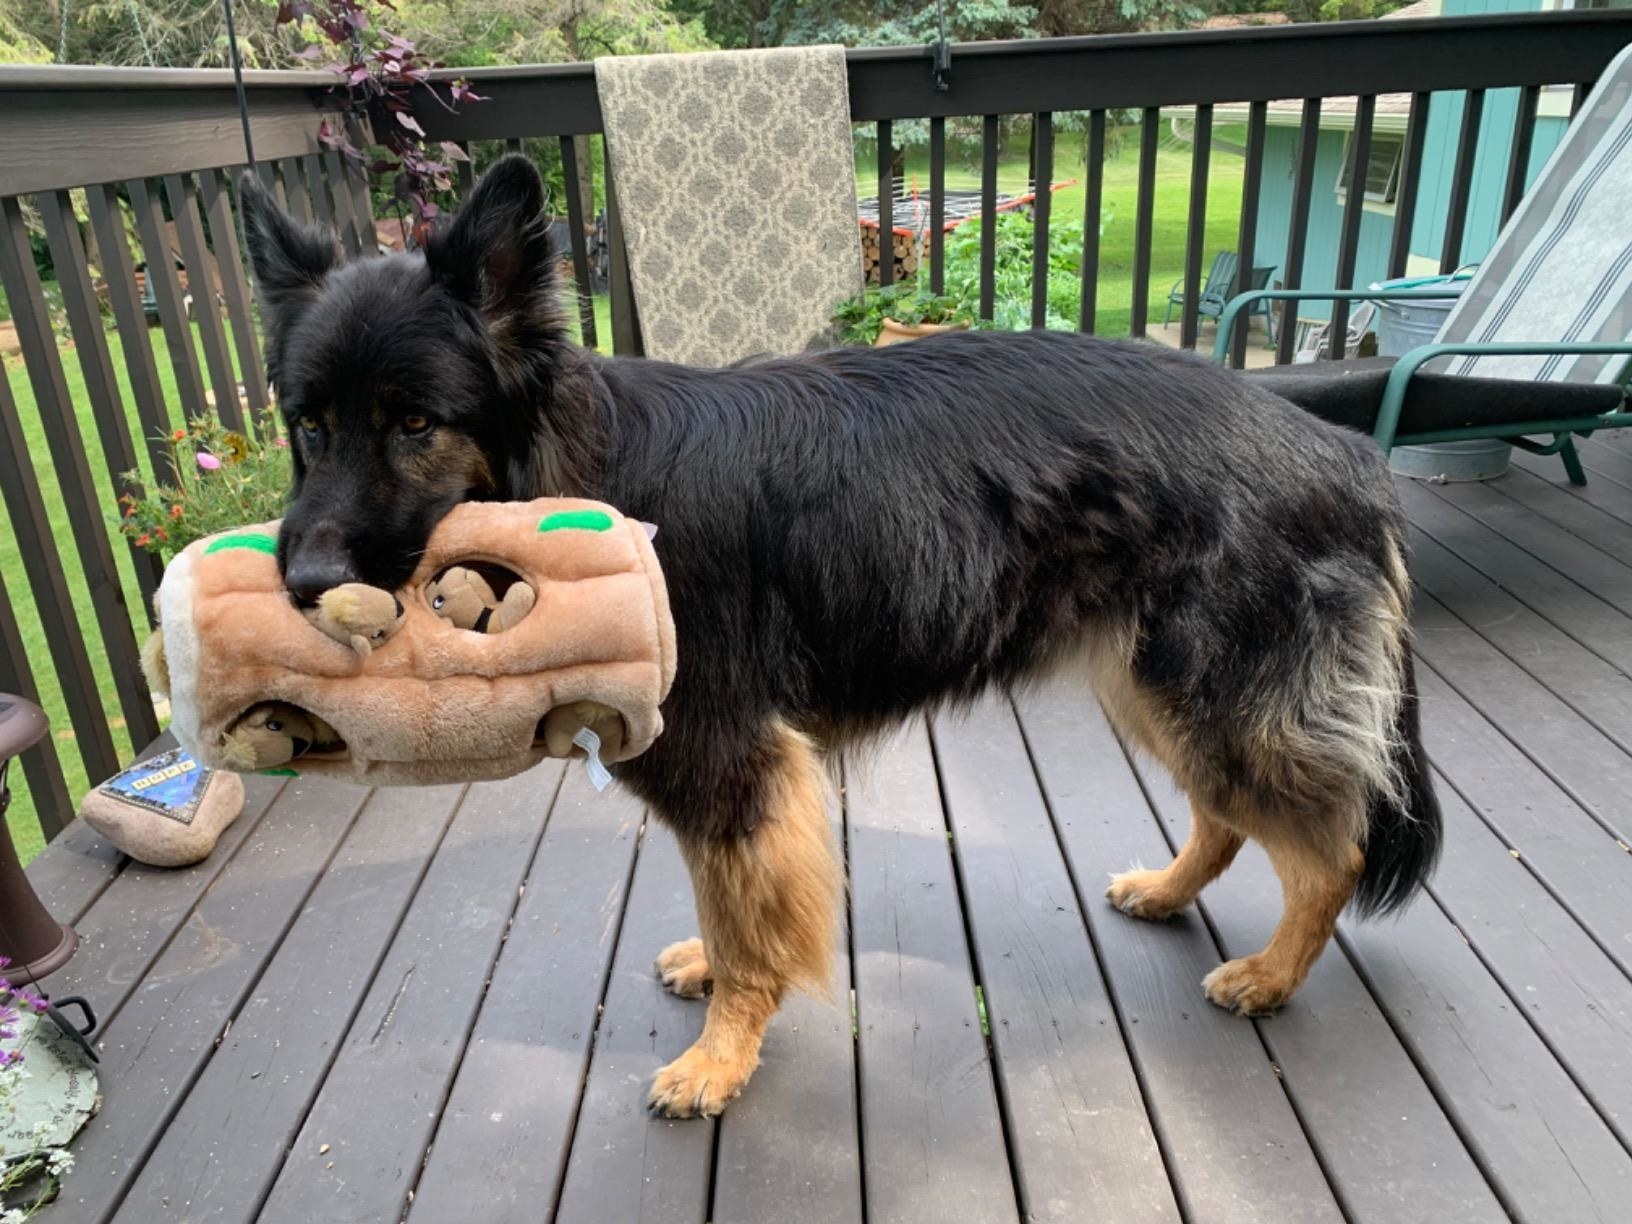 Reviewer photo of a German Shepherd holding the tree stump toy with squirrels inside in their mouth